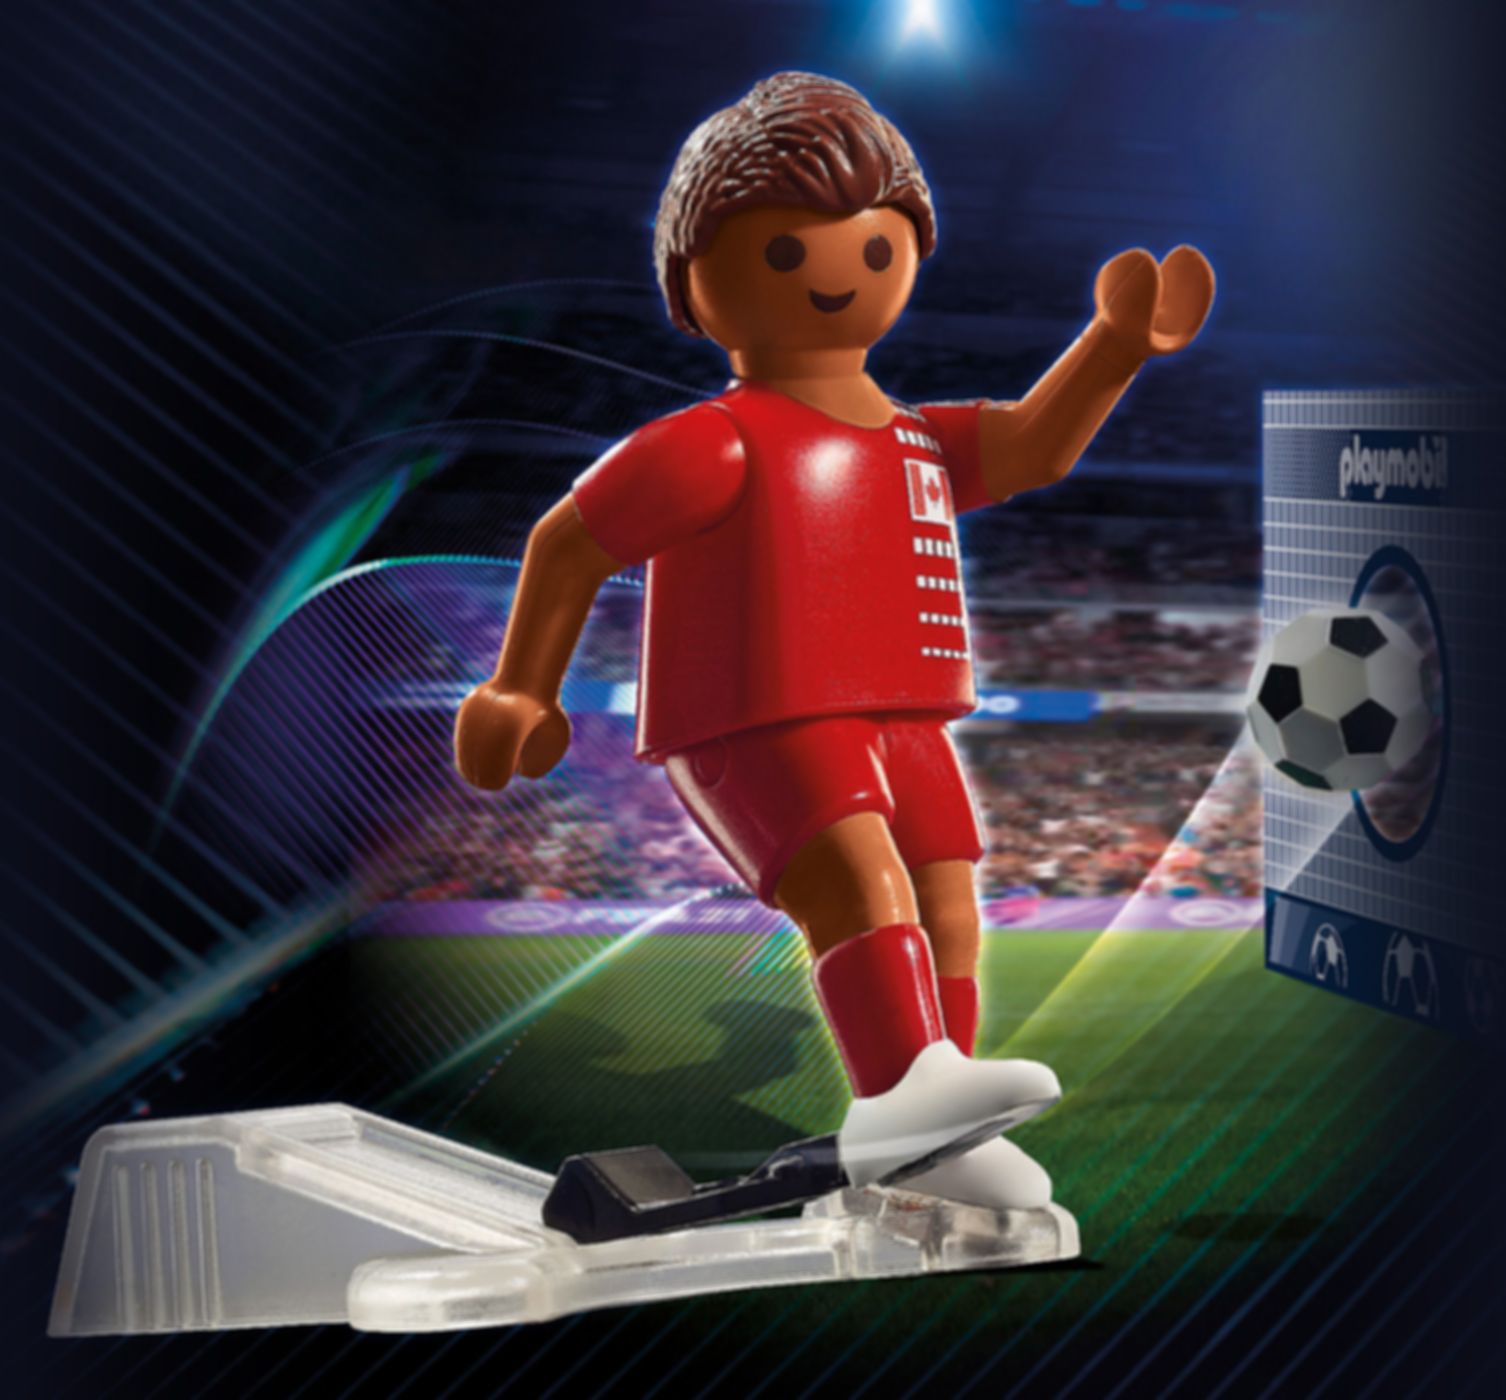 Playmobil® Sports & Action Soccer Player - Canada